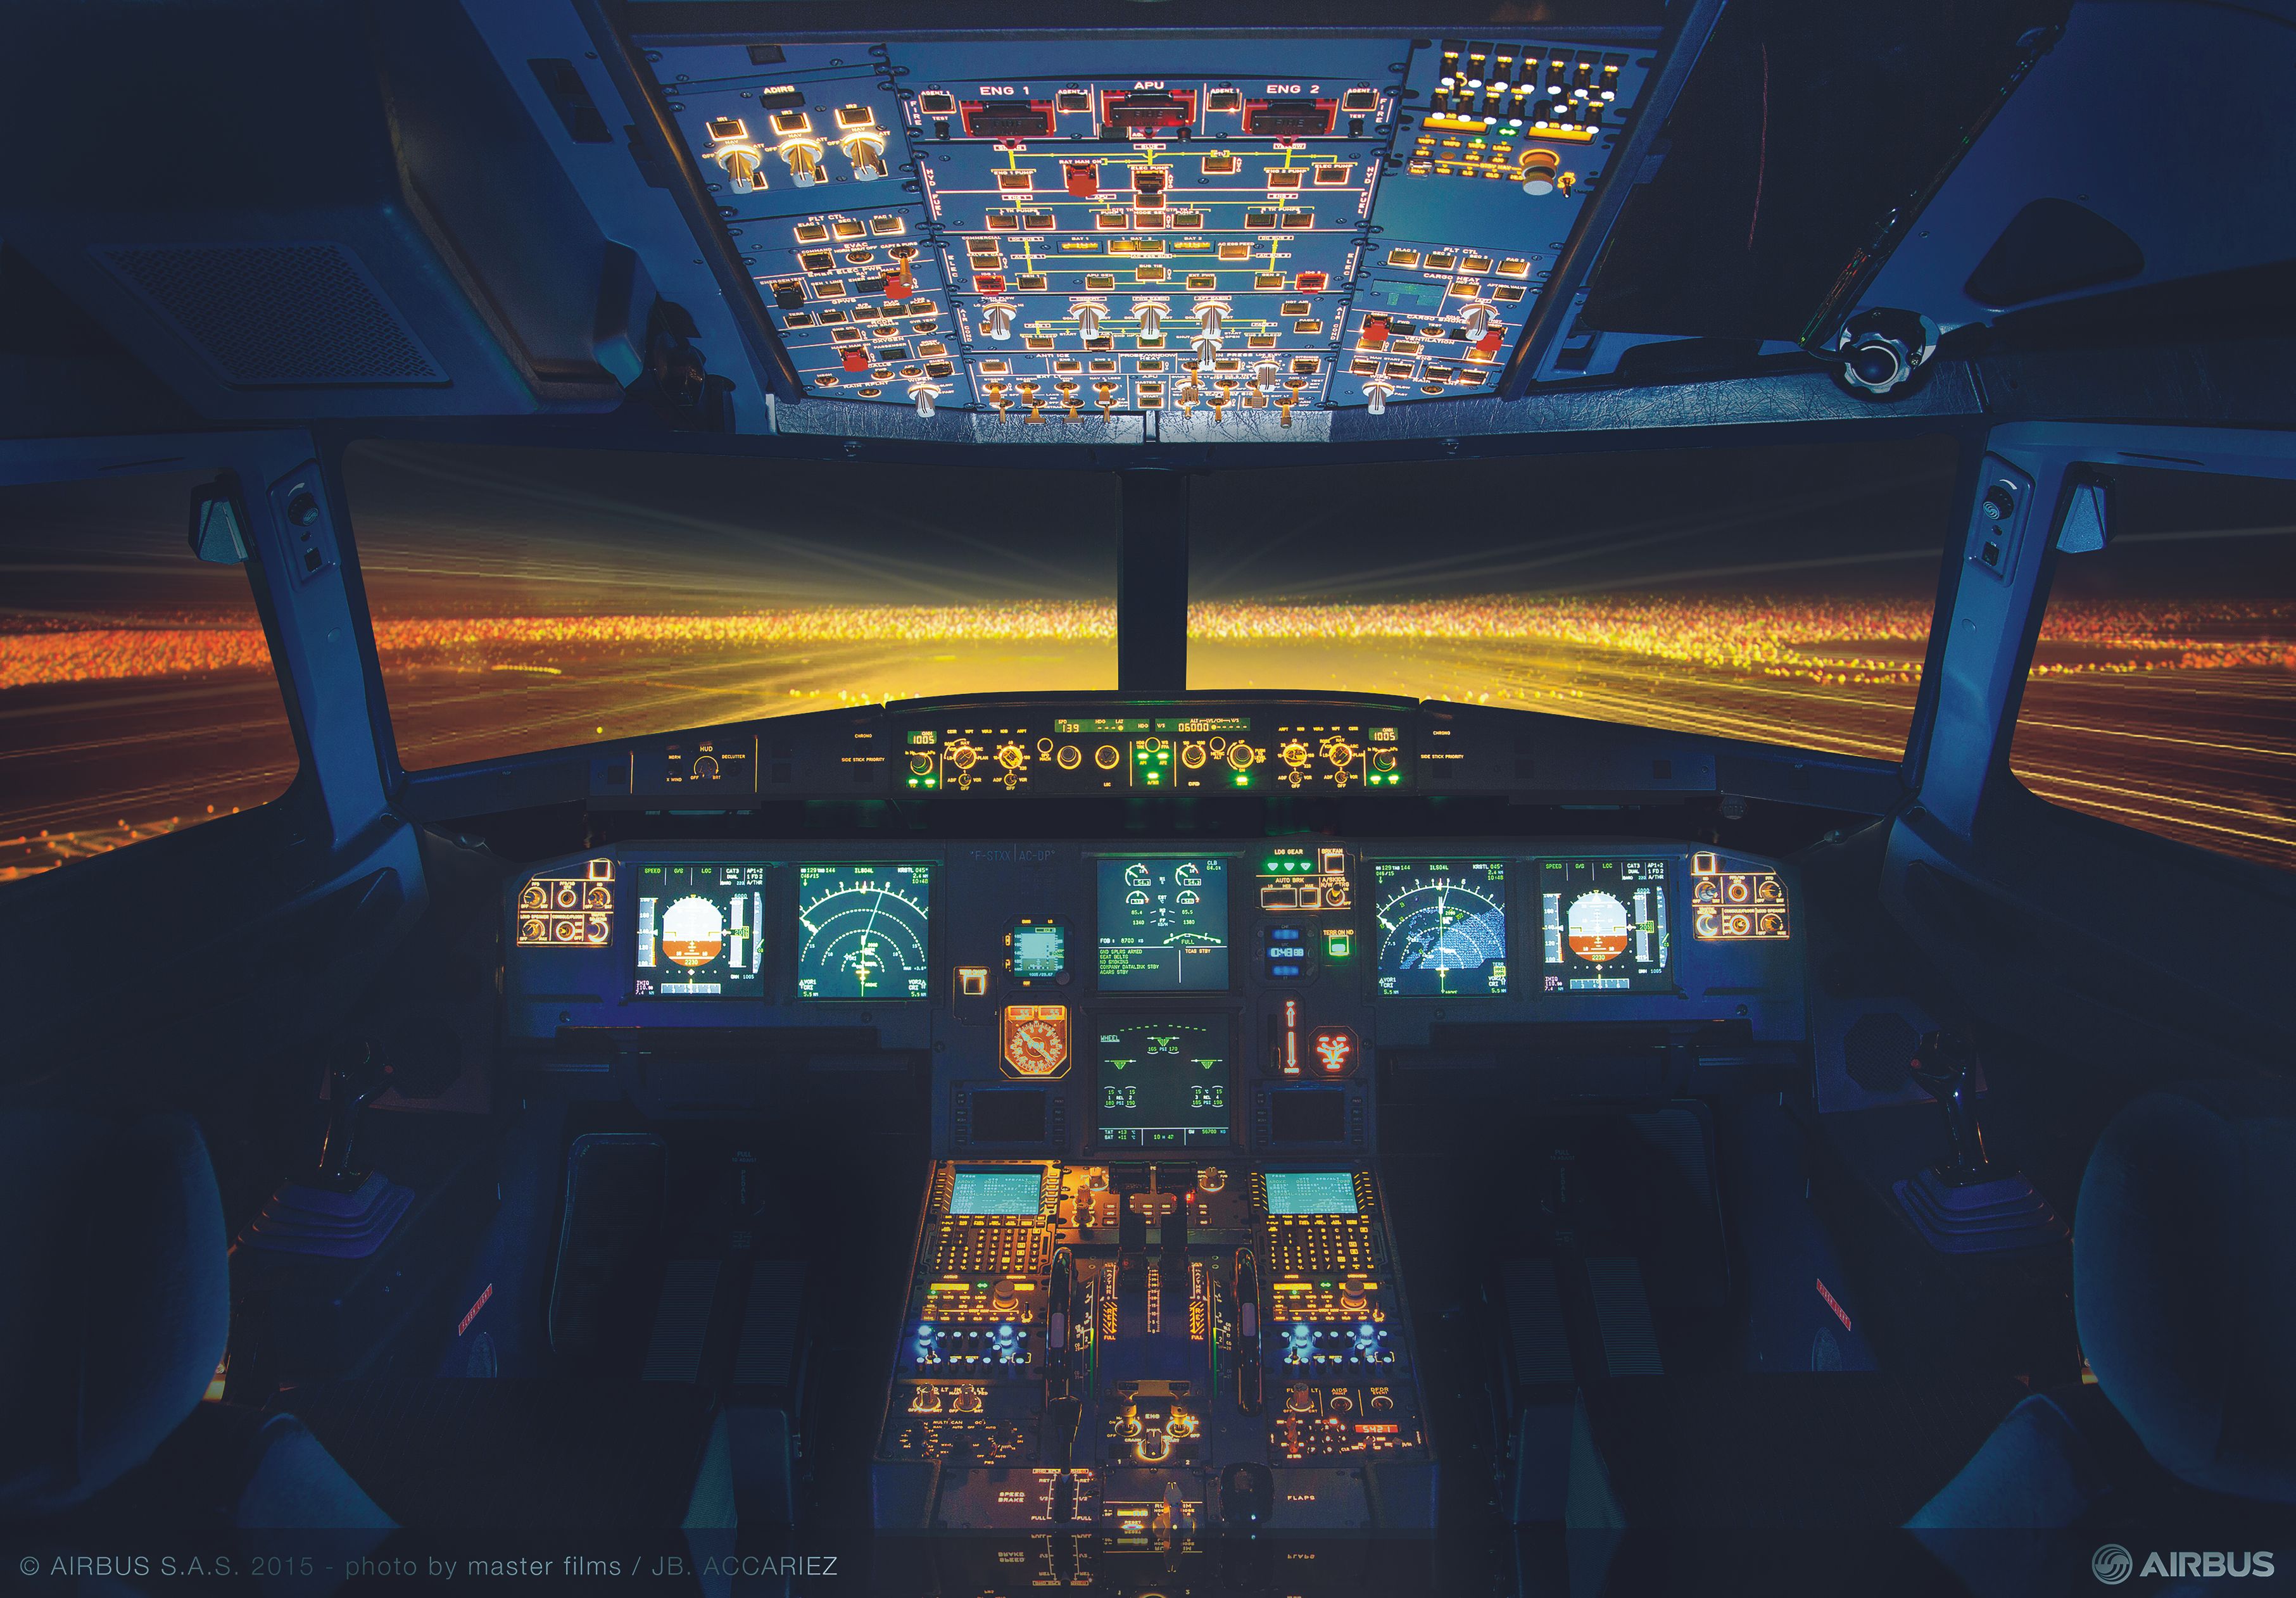 A320- Airbus cockpit by night